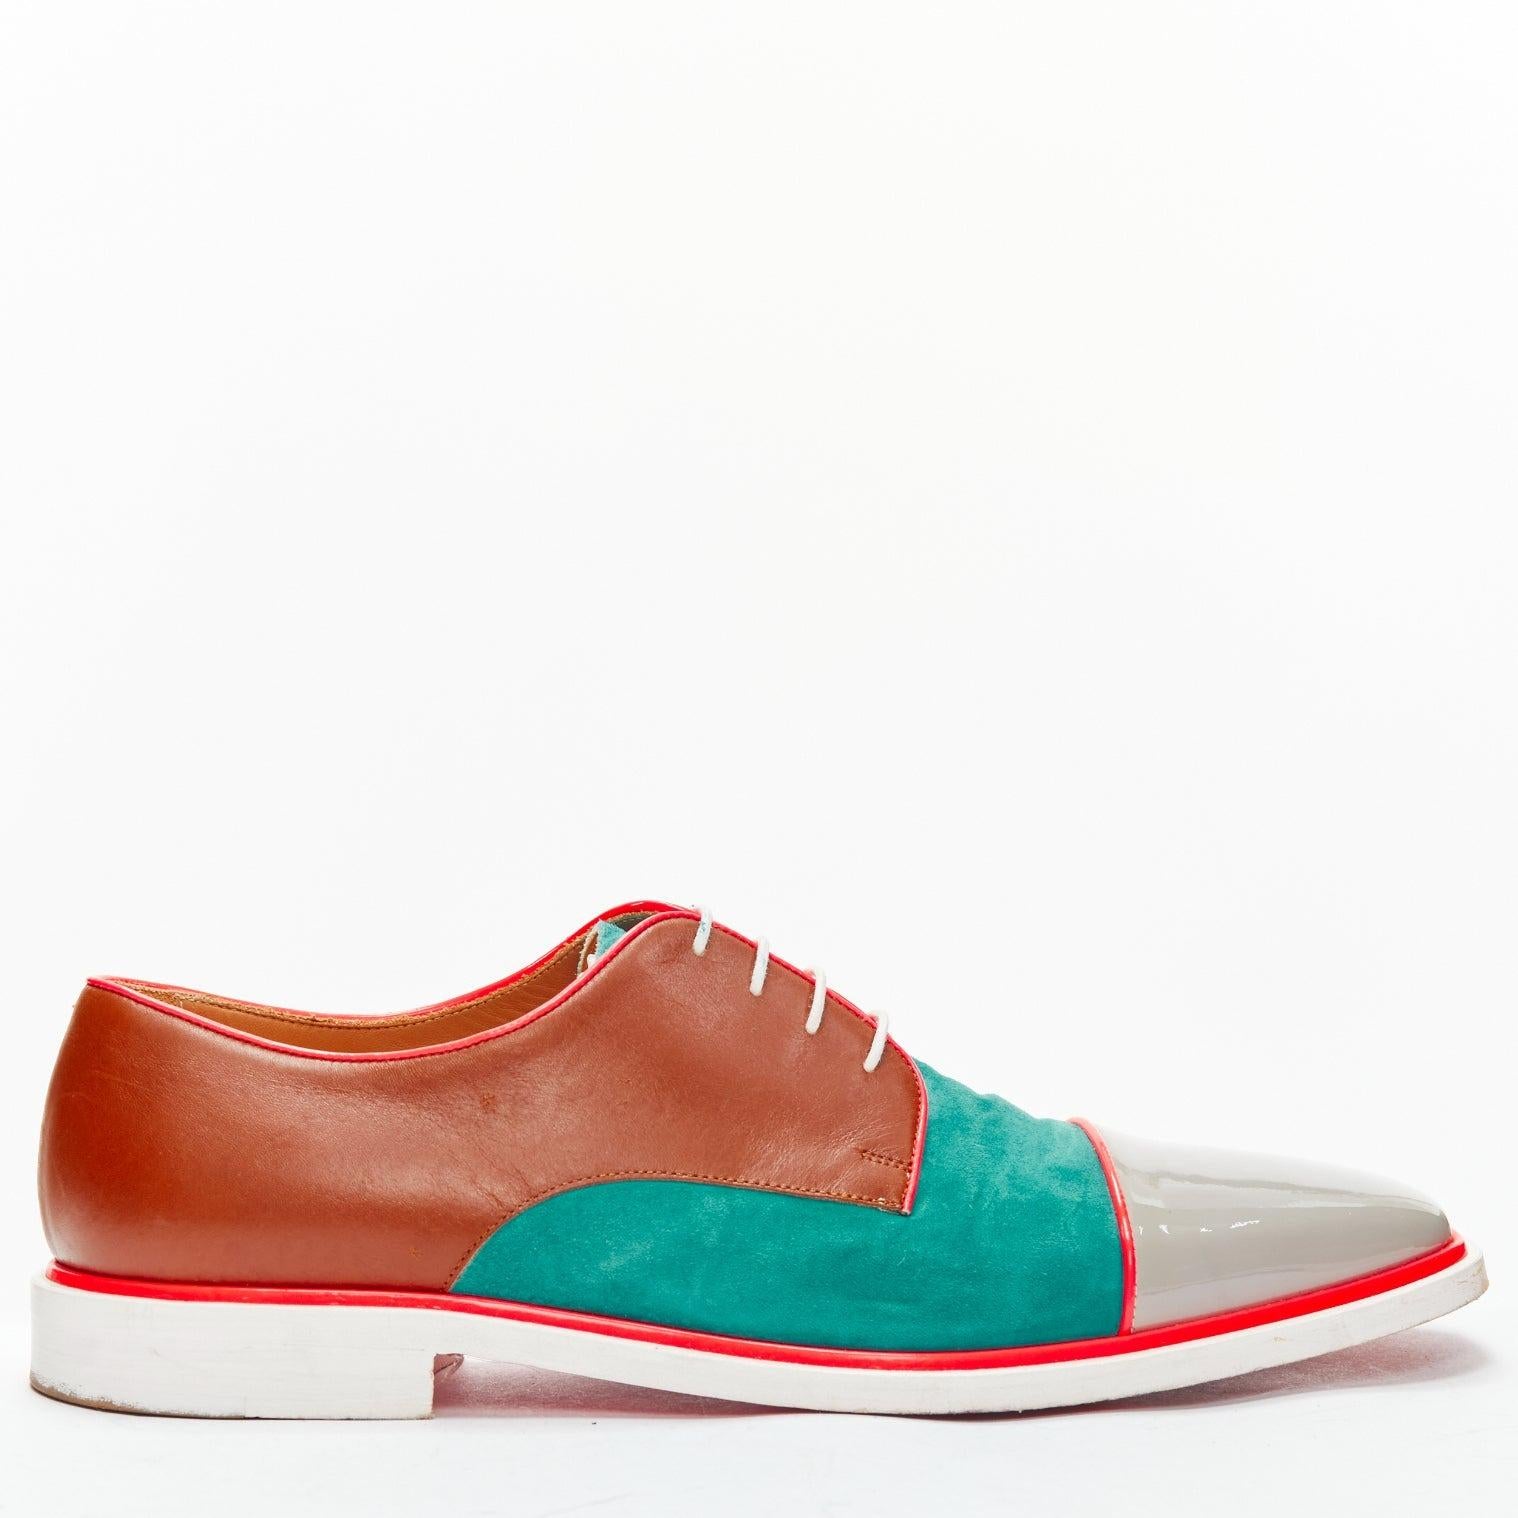 CHRISTIAN LOUBOUTIN green suede neon piping brown brogues EU42.5
Reference: JSLE/A00081
Brand: Christian Louboutin
Material: Leather
Color: Neon Pink, Green
Pattern: Solid
Closure: Lace Up
Lining: Nude Leather
Extra Details: Neon orange piping